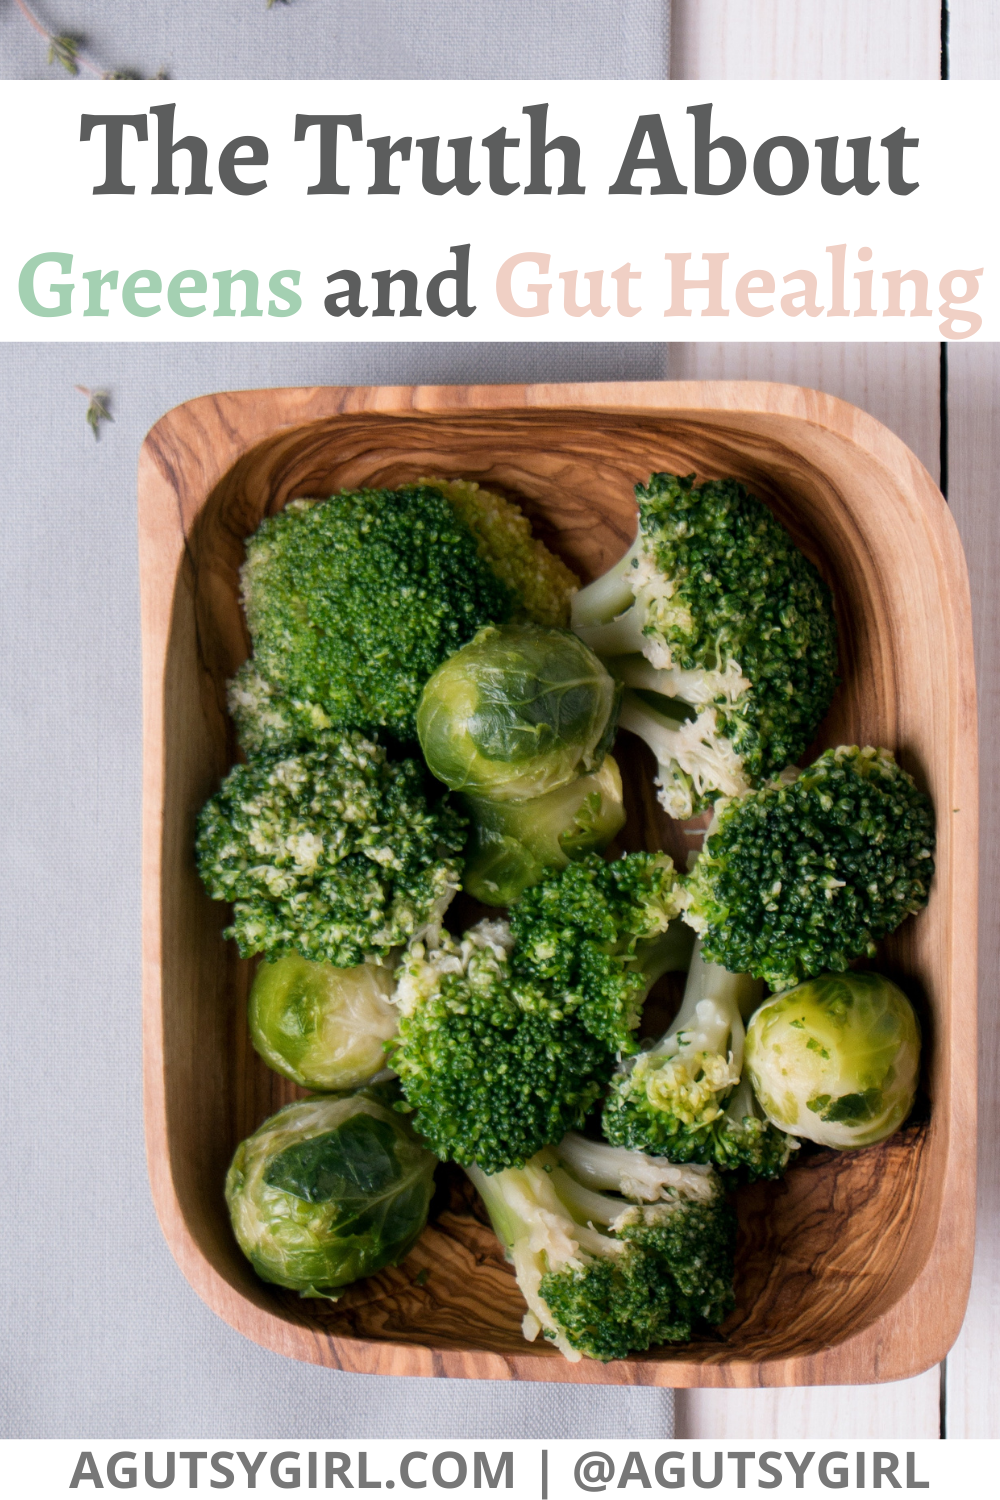 The Truth About Greens and Gut Healing agutsygirl.com #greens #greenveggies #guthealth